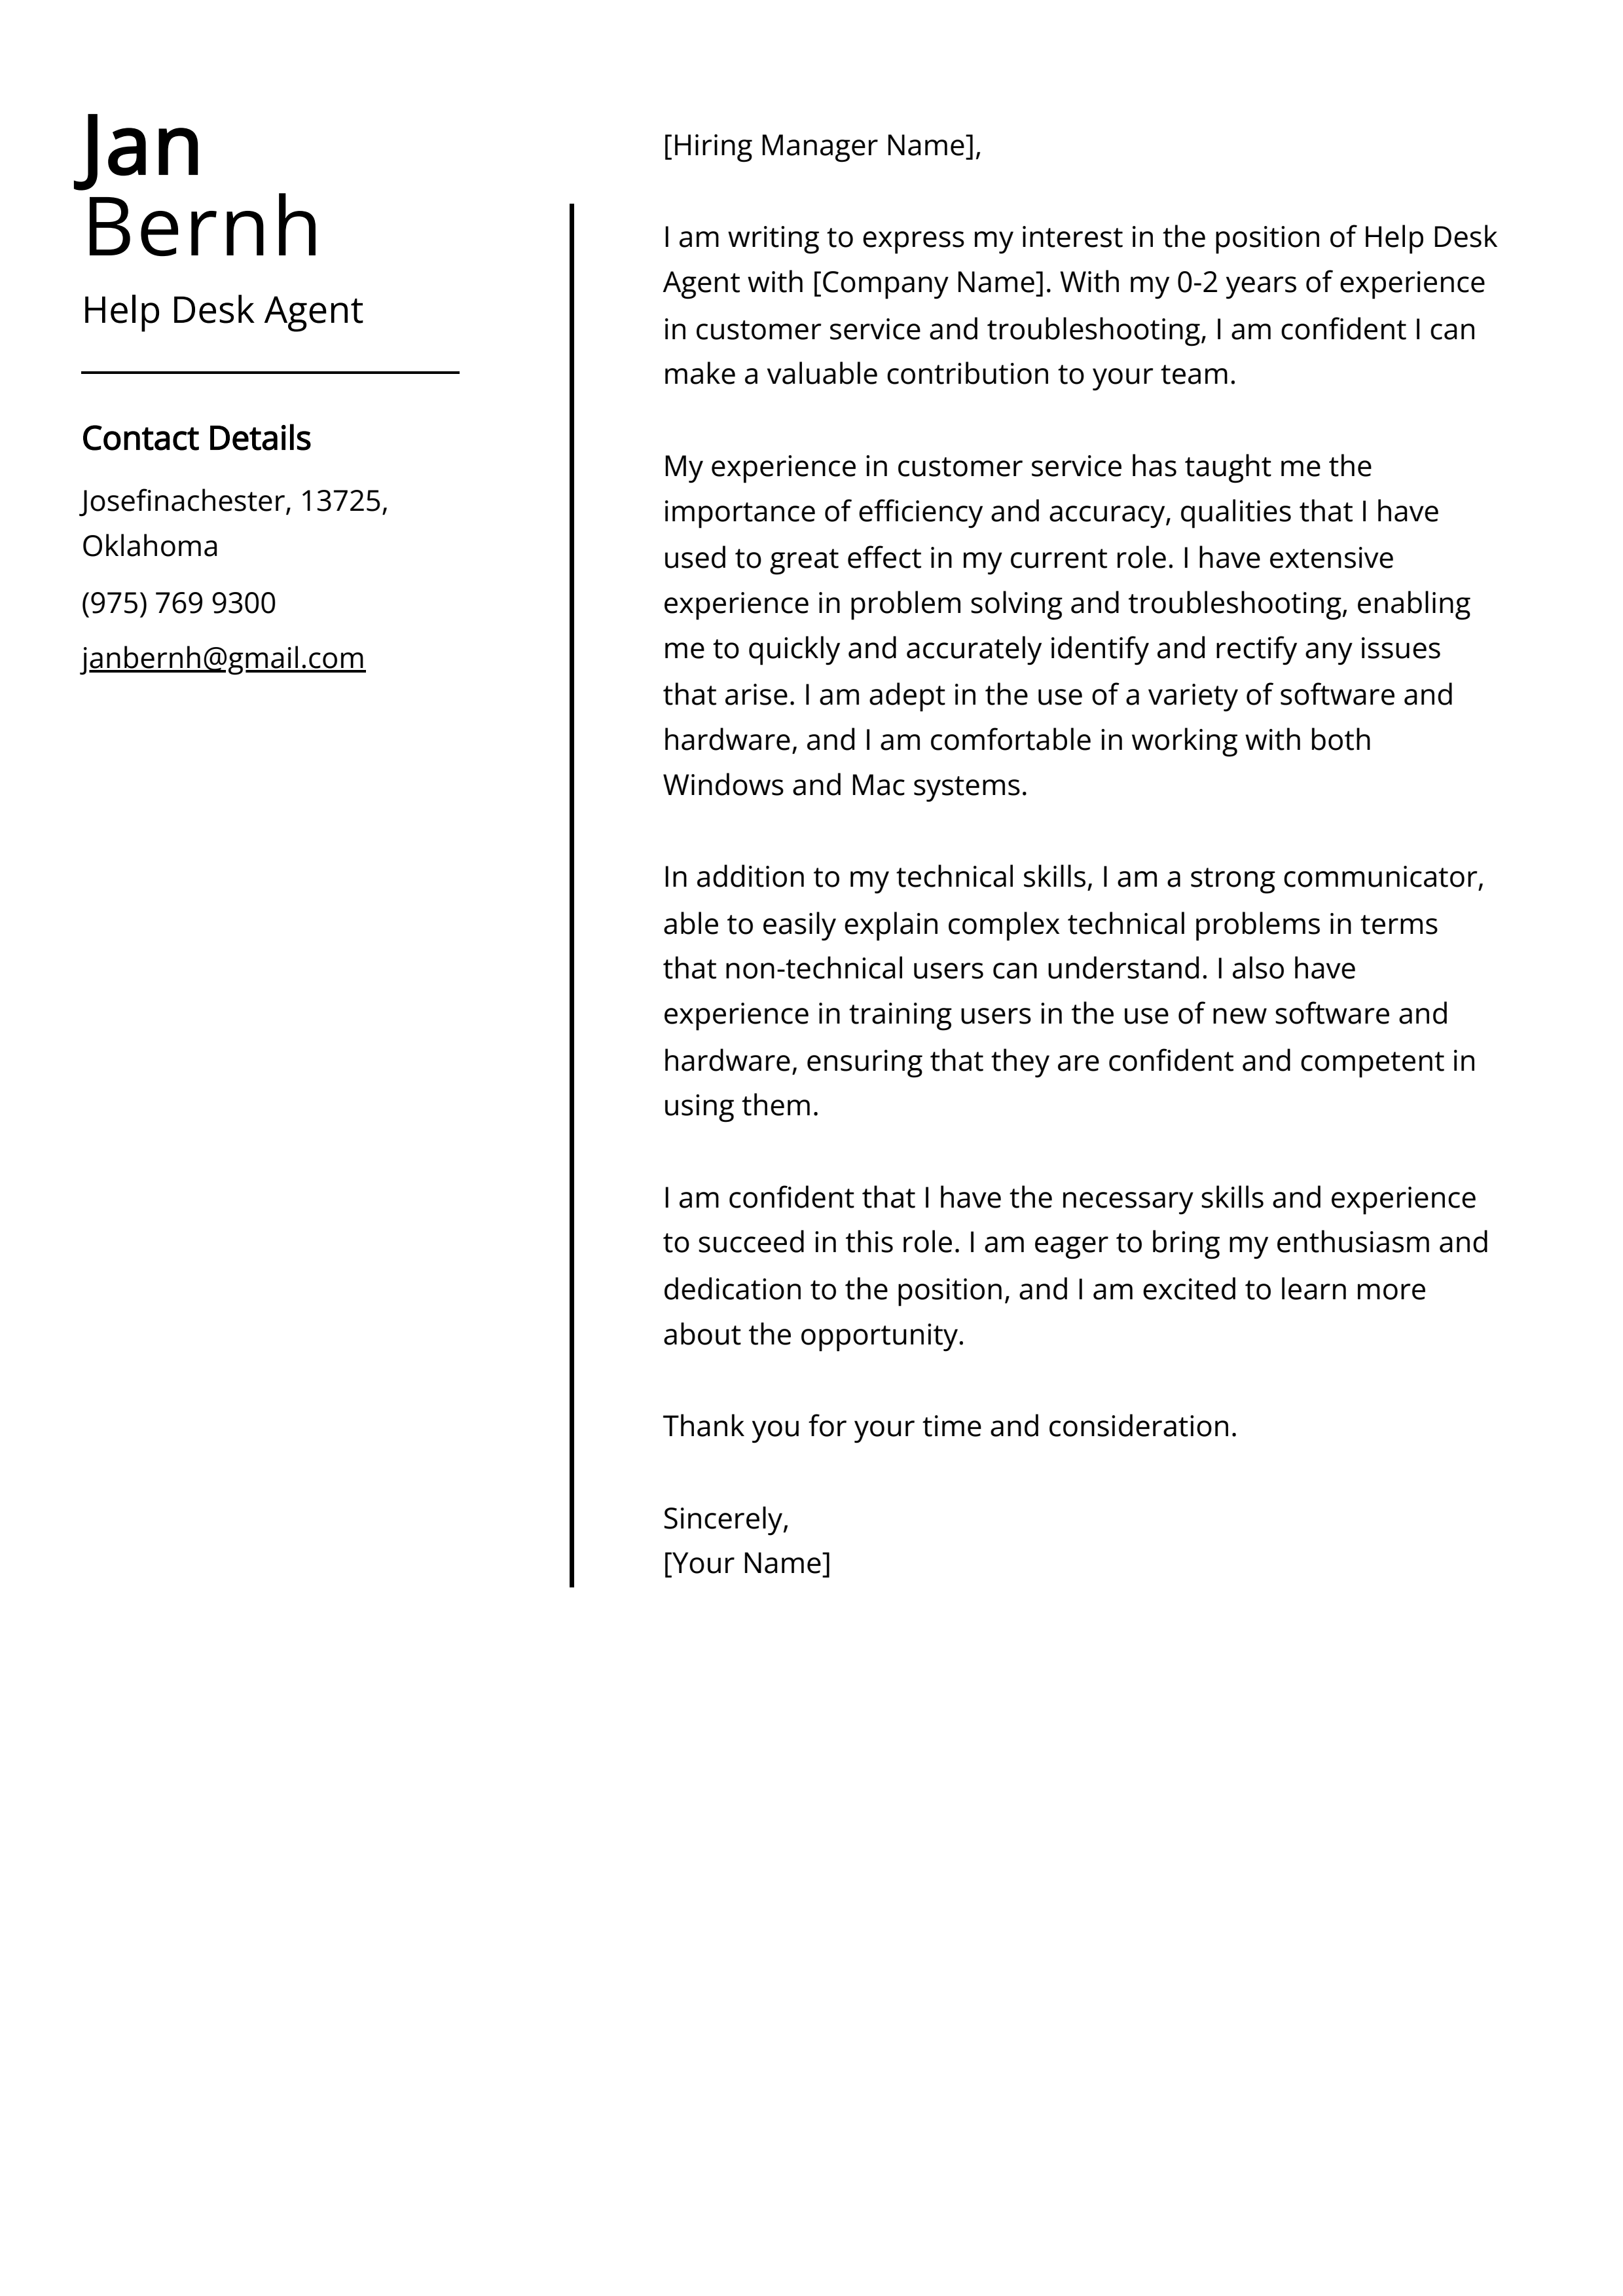 Help Desk Agent Cover Letter Example